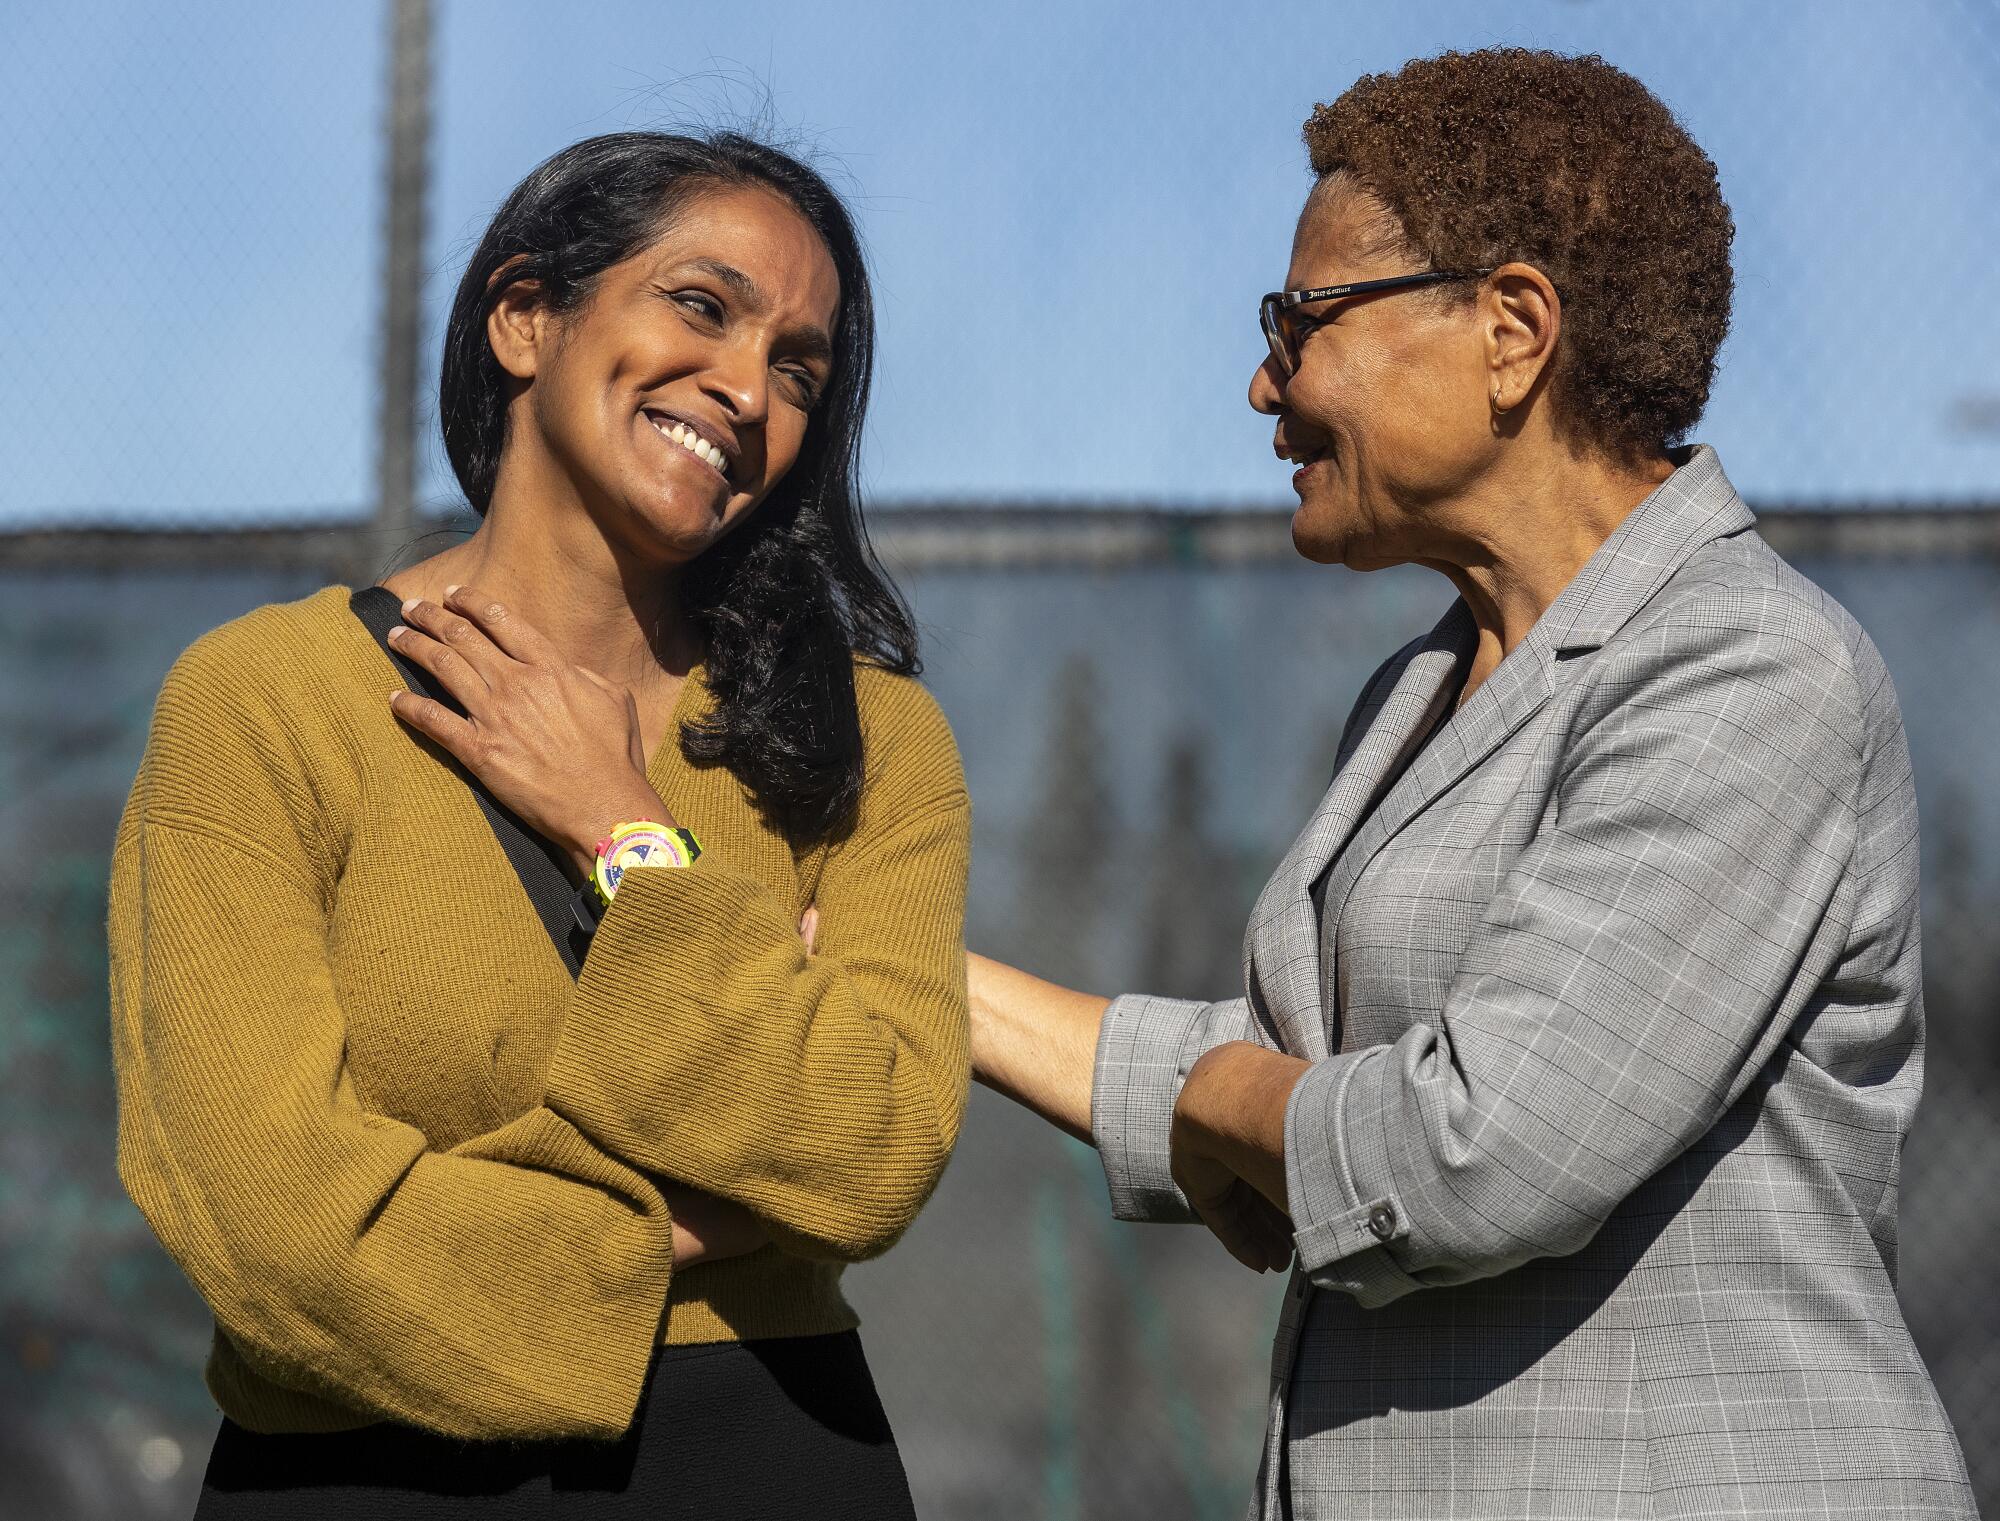 Los Angeles City Councilmember Nithya Raman, left, talks with Mayor Karen Bass at one of her campaign events in Sherman Oaks.